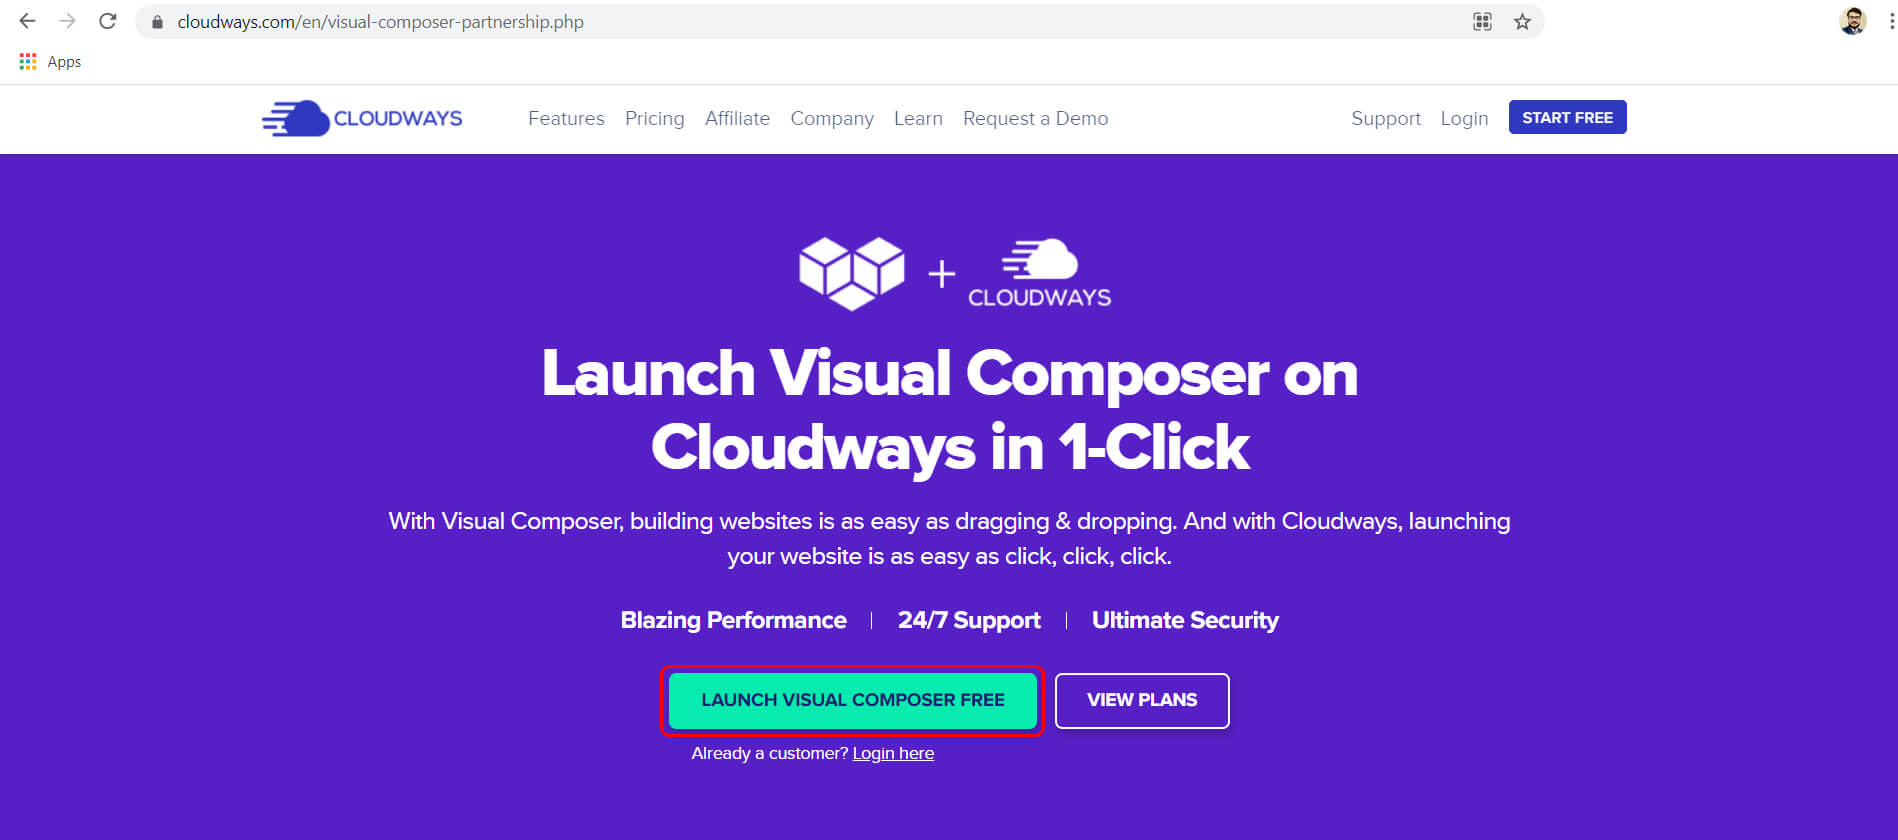 Launch Visual Composer on Cloudways landing page